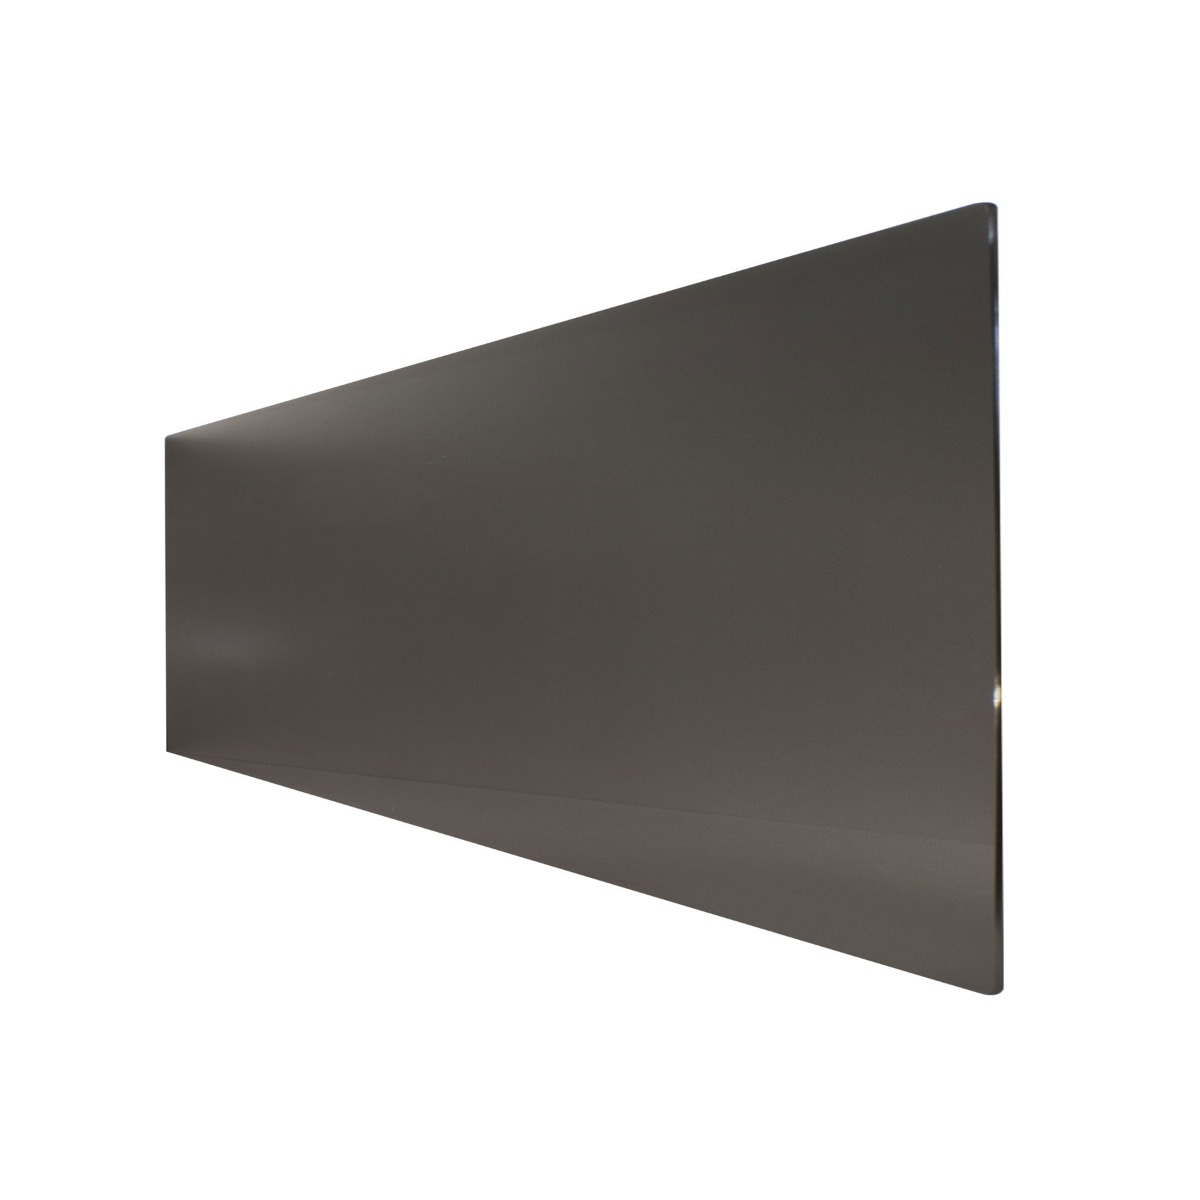 Technotherm ISP Design Glass Infrared Heating Panel - Black 950w (1630 x 690mm)